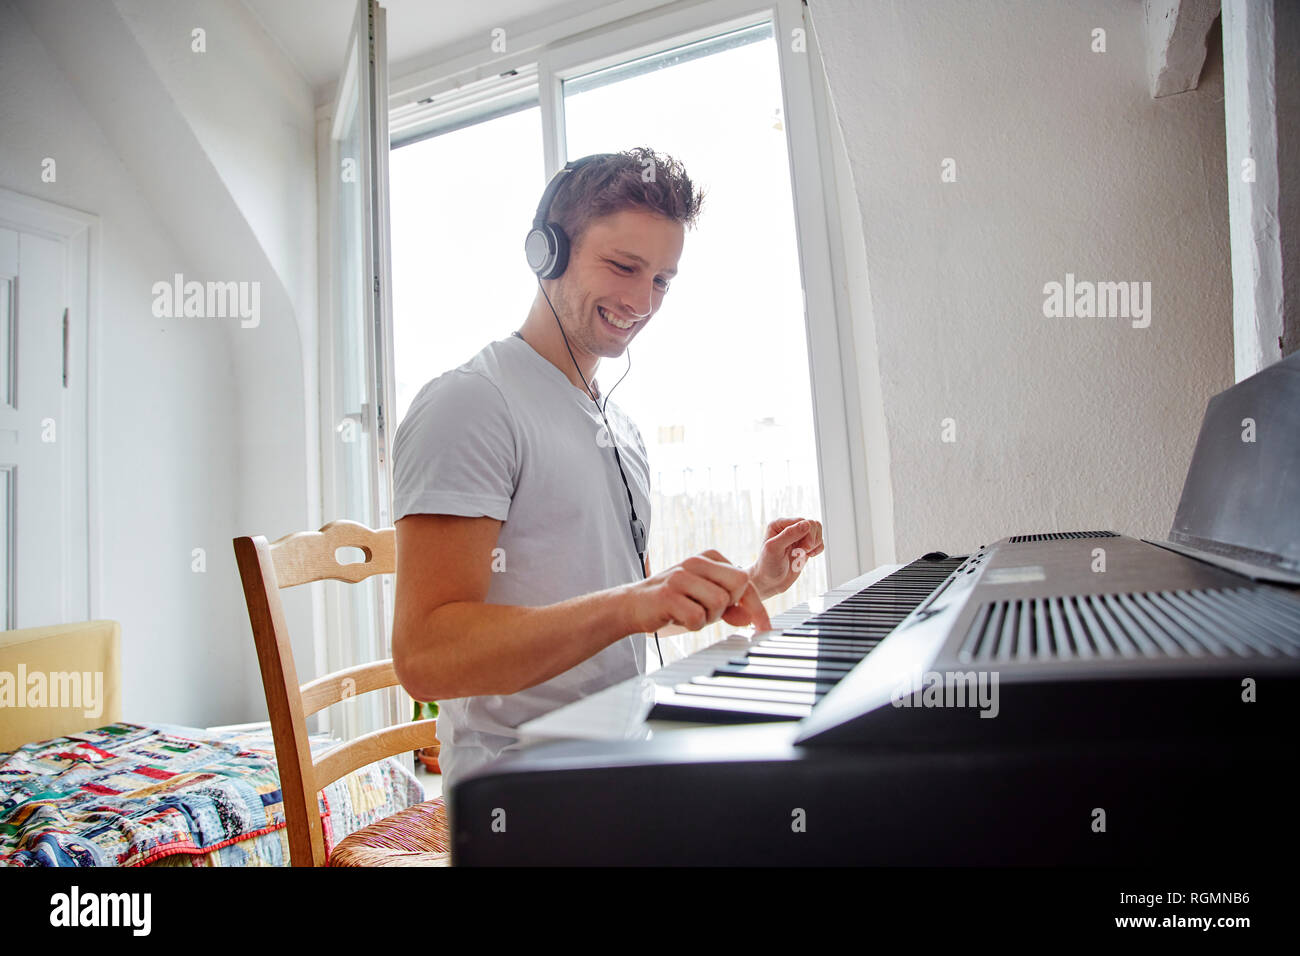 Smiling young man at home wearing headphones playing digital piano Stock Photo